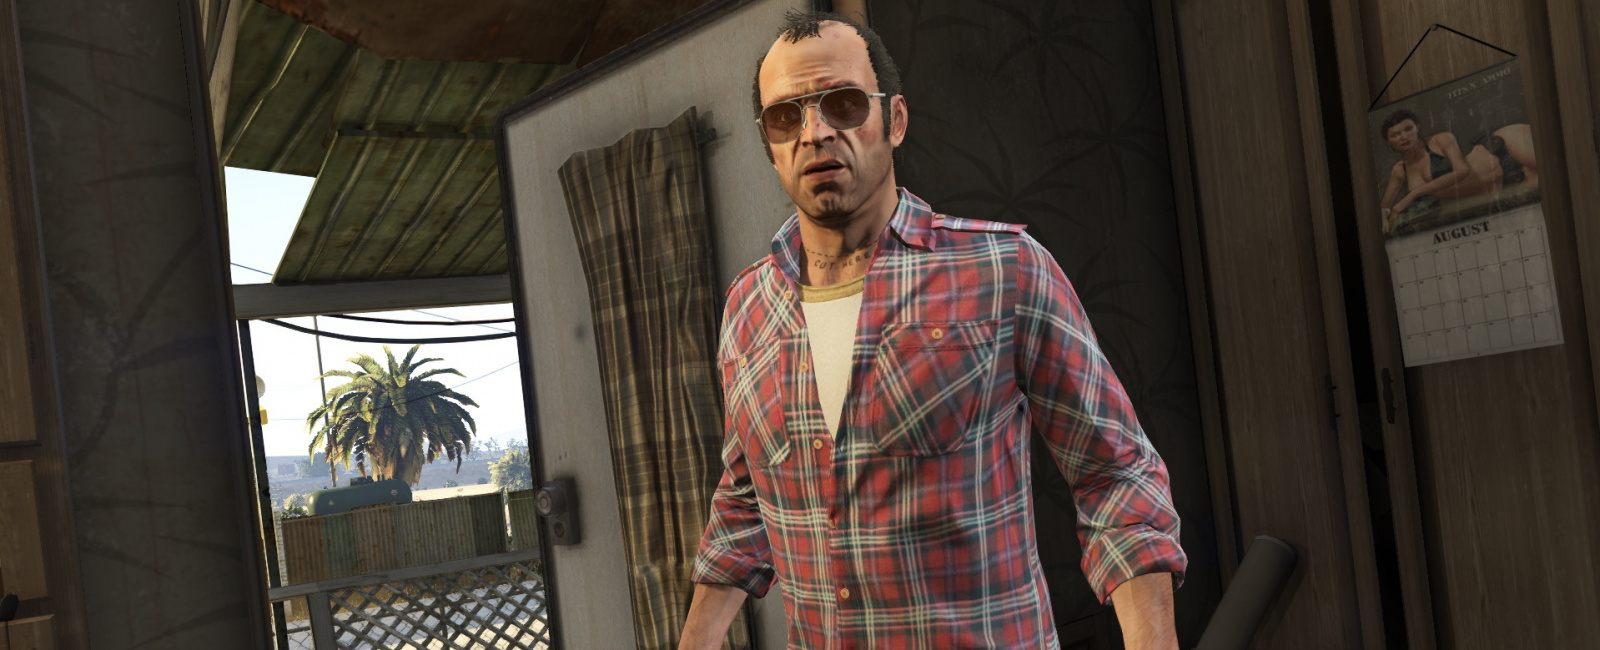 GTA 5 Cheats And Codes For PC, PS3, PS4, & Xbox One/360 [2022]